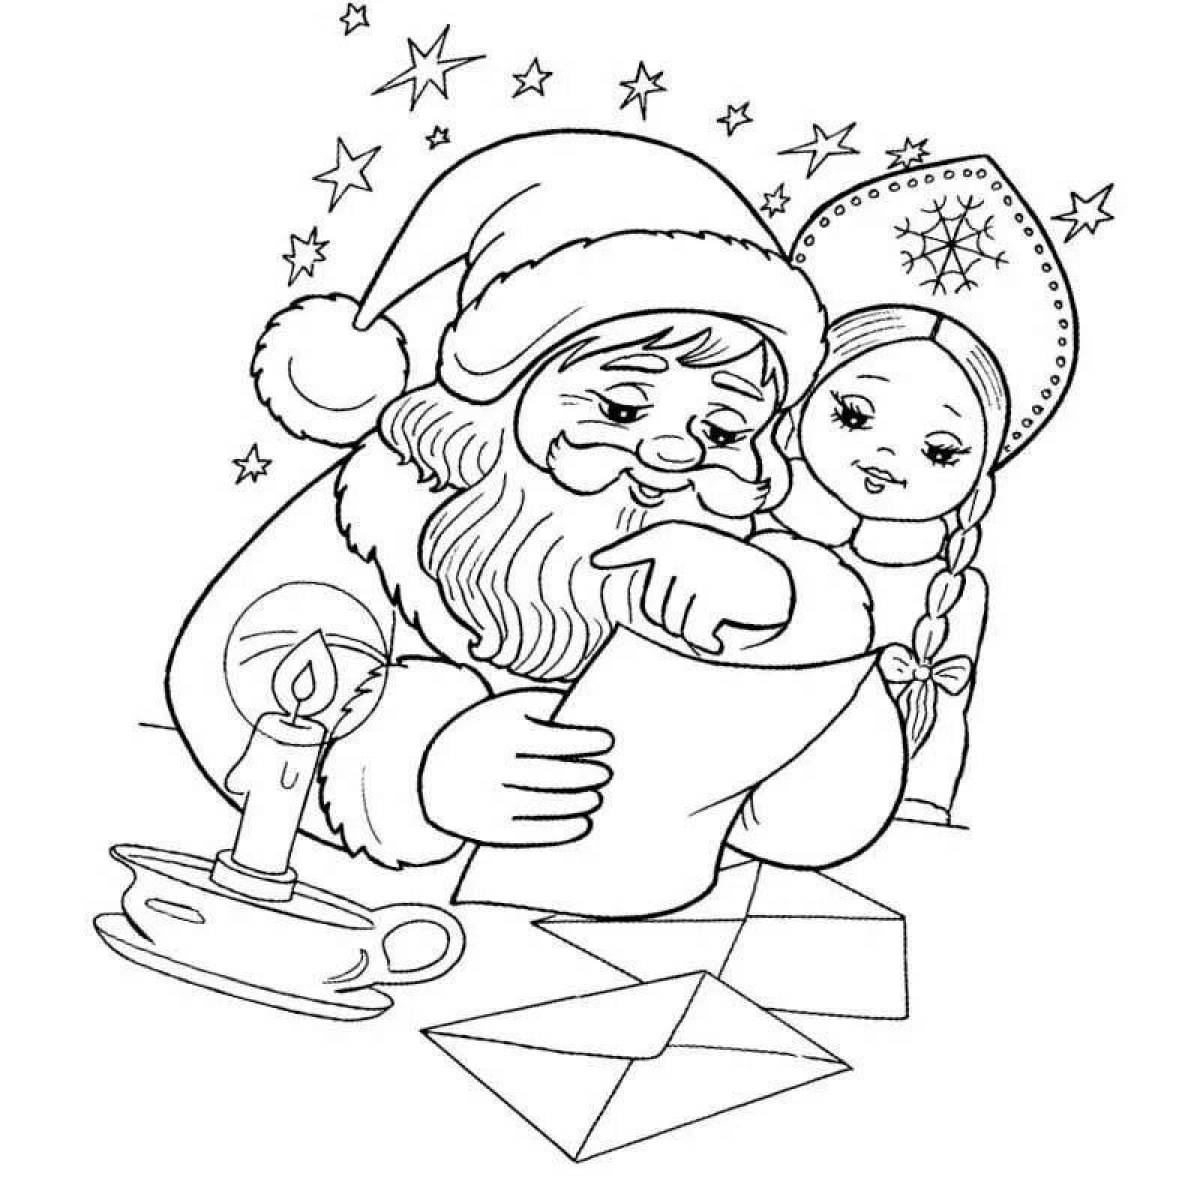 Blessed Snow Maiden coloring page